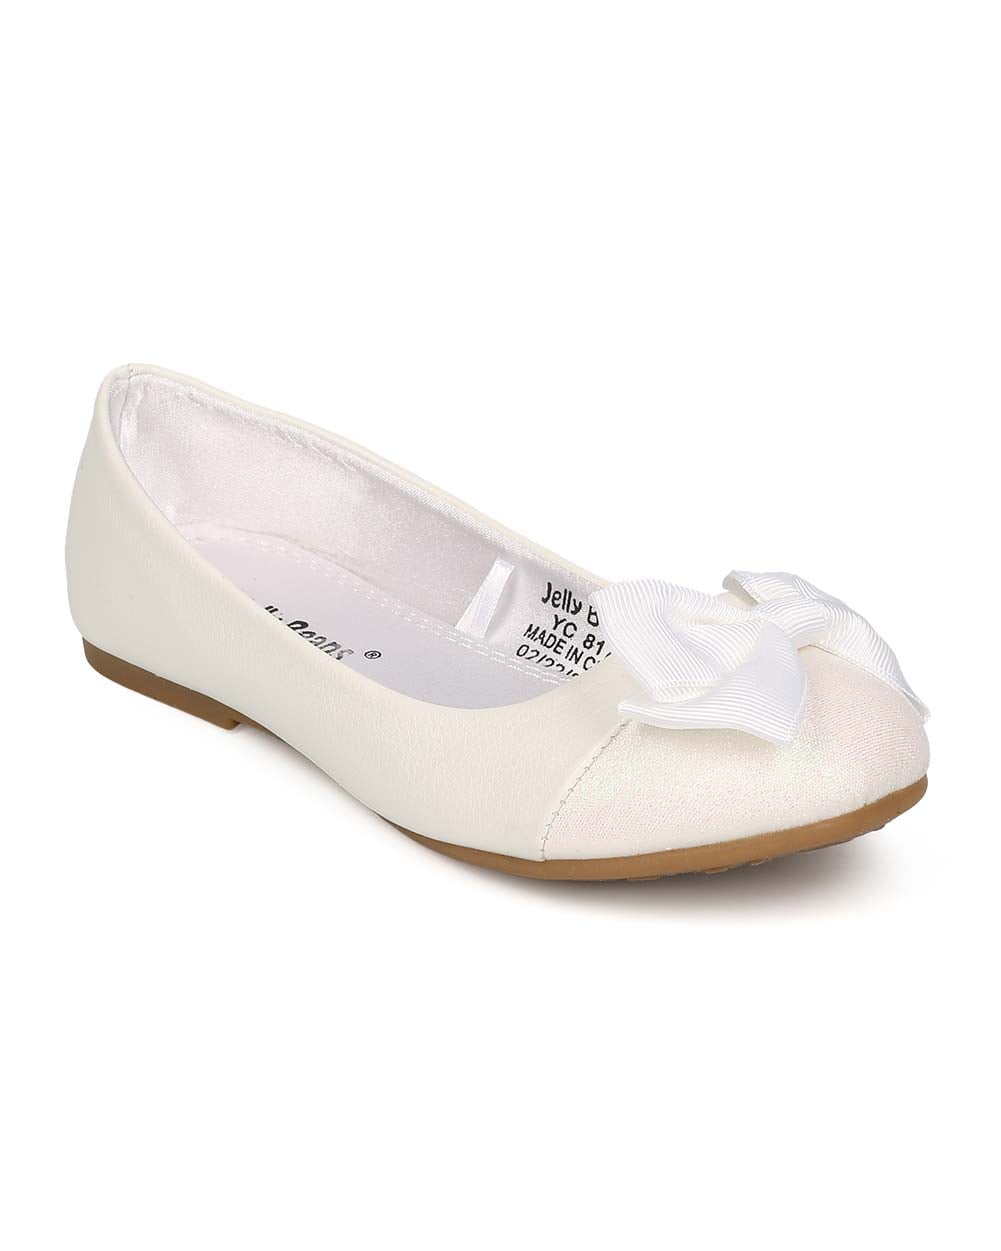 New Girl Soda Moby-2S Patent Round Toe Slip On Bow Ballet Flat Size 9-4 